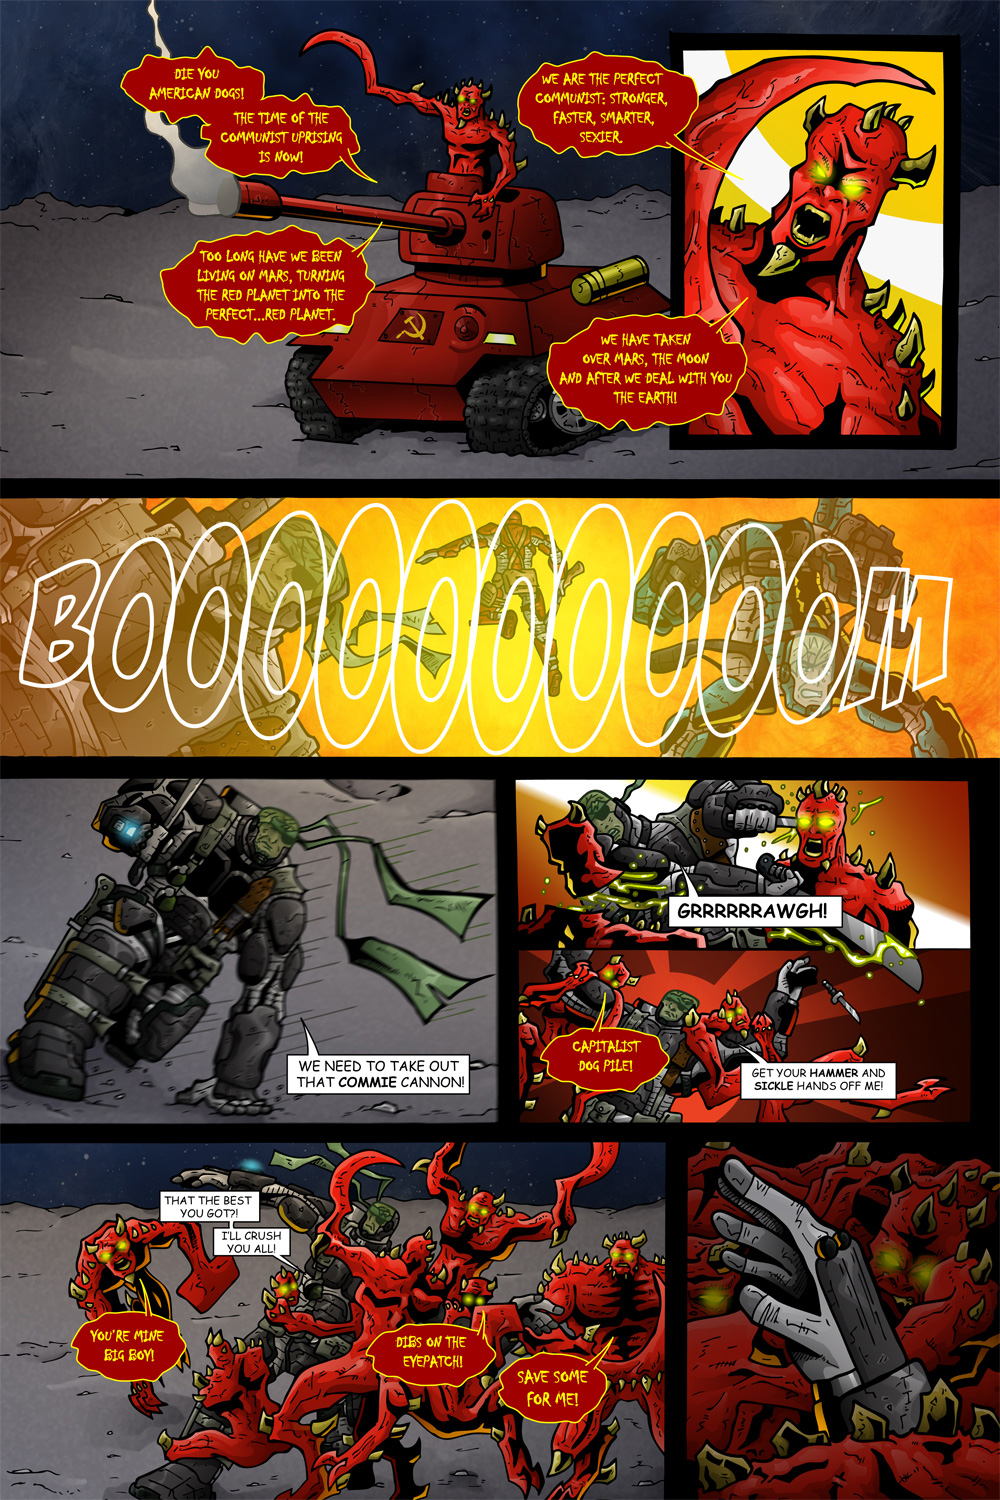 MISSION 006: PAGE 11 “CAPITALIST DOG PILE!”